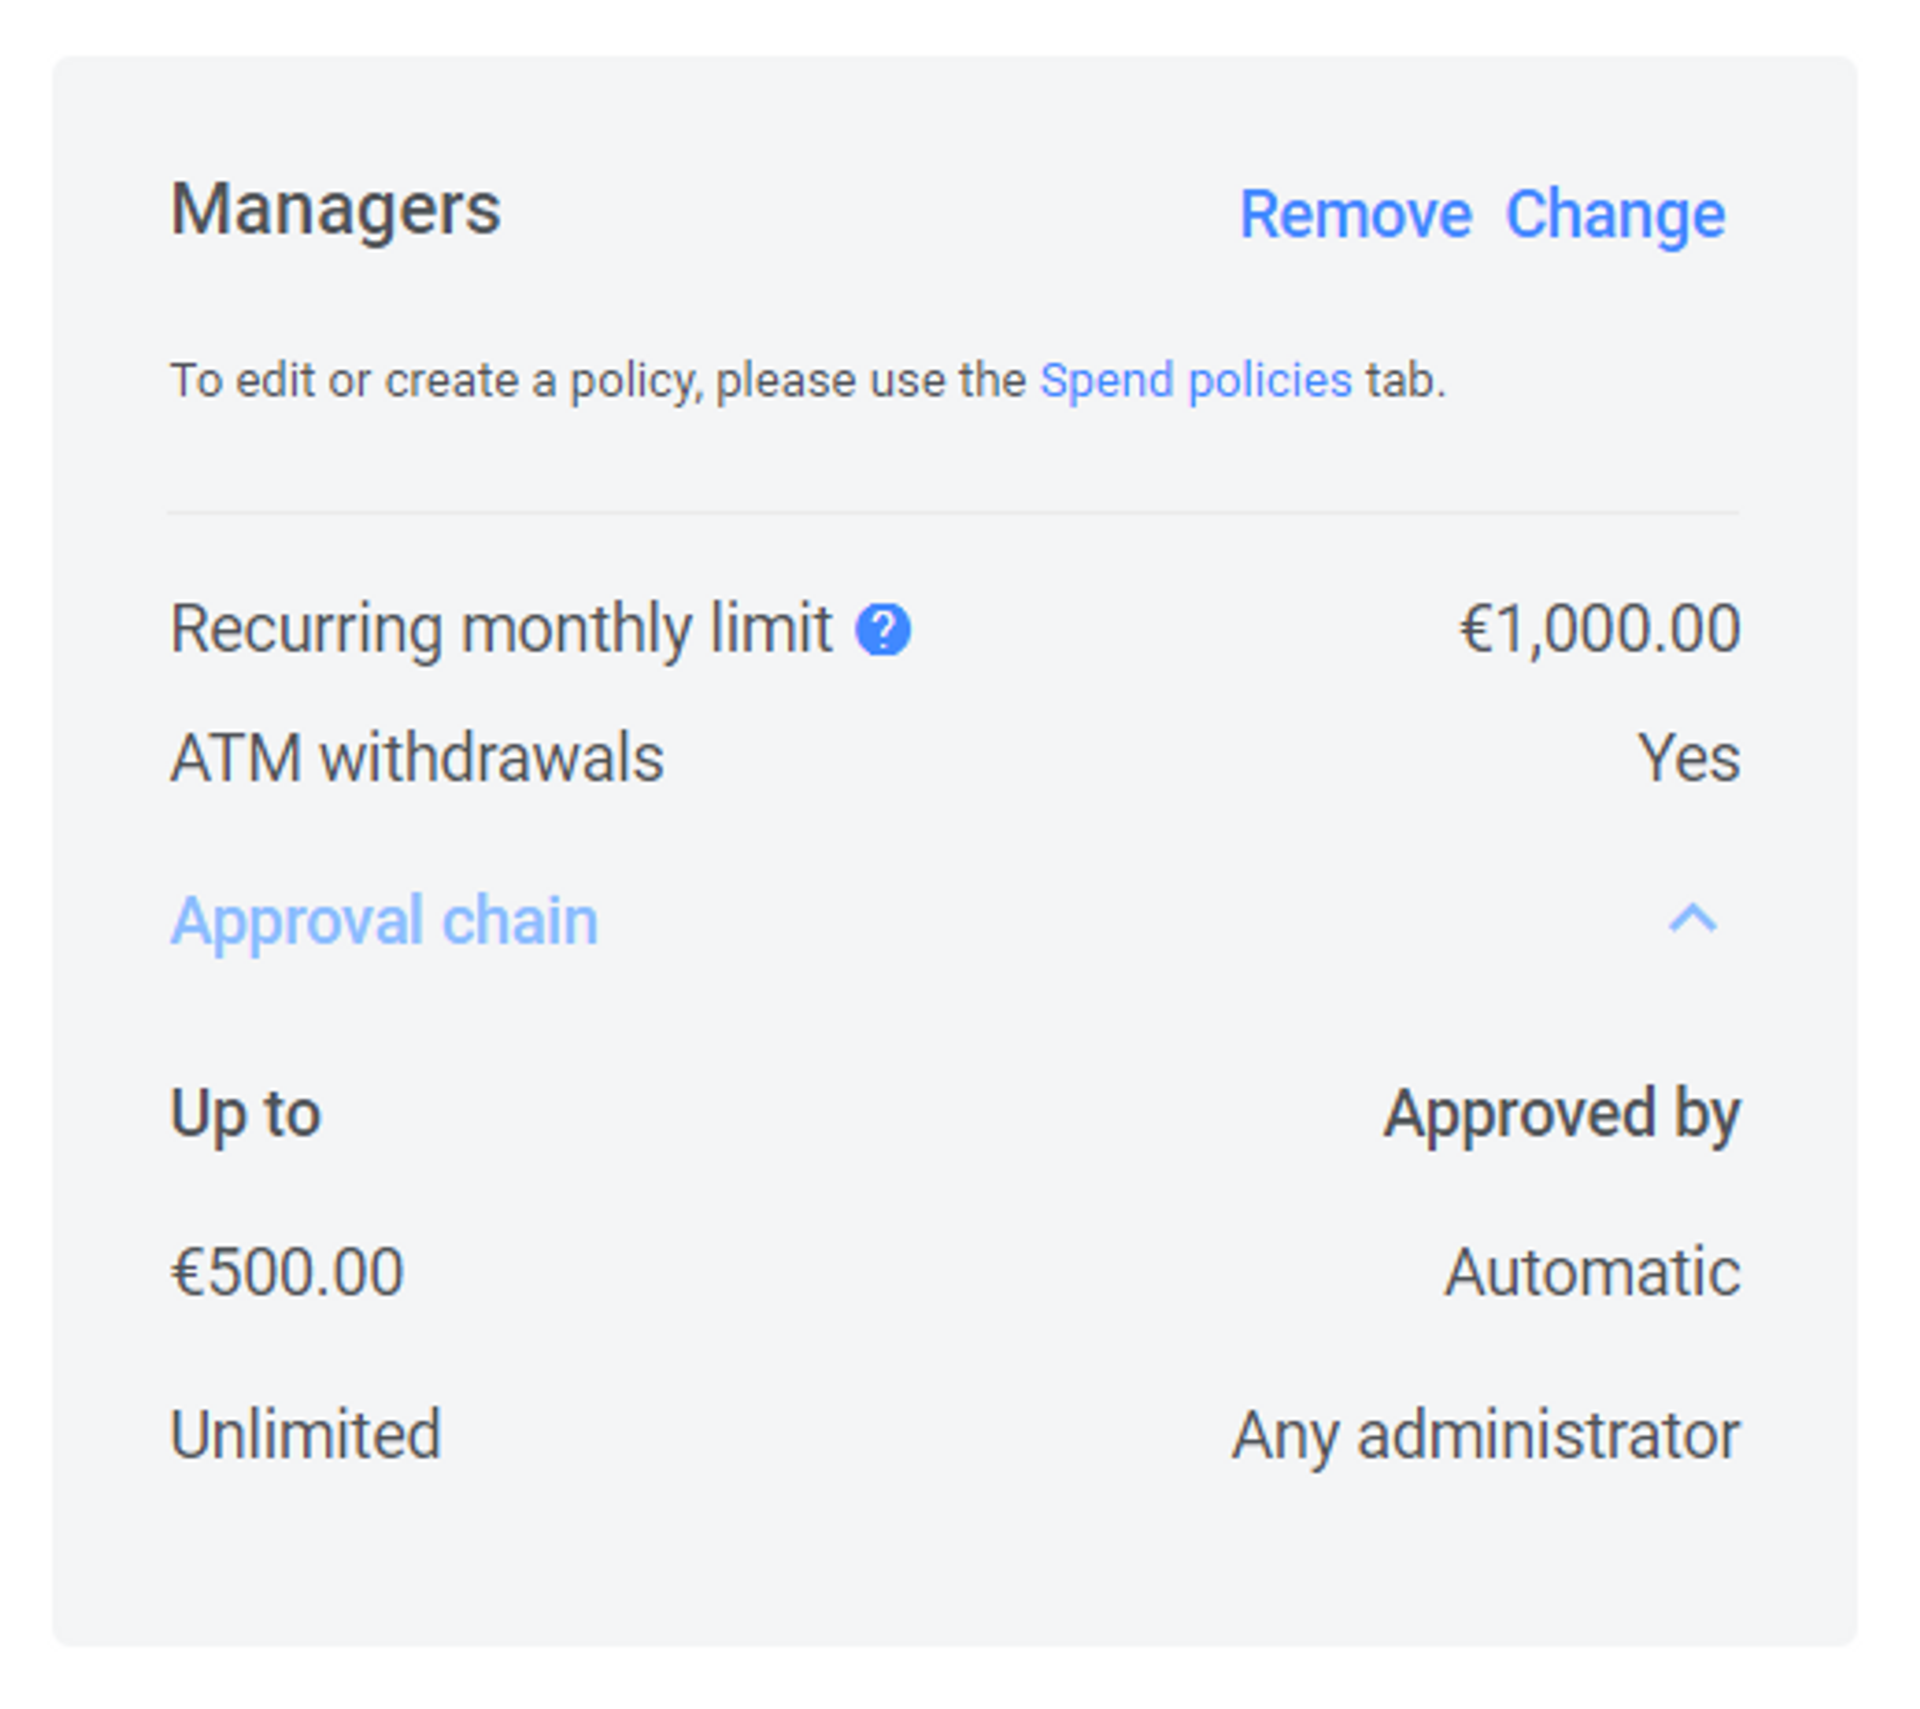 You can also define a limit for automatic approval on requests that is helpful if you don't want to bother administrators and the finance team for small requests